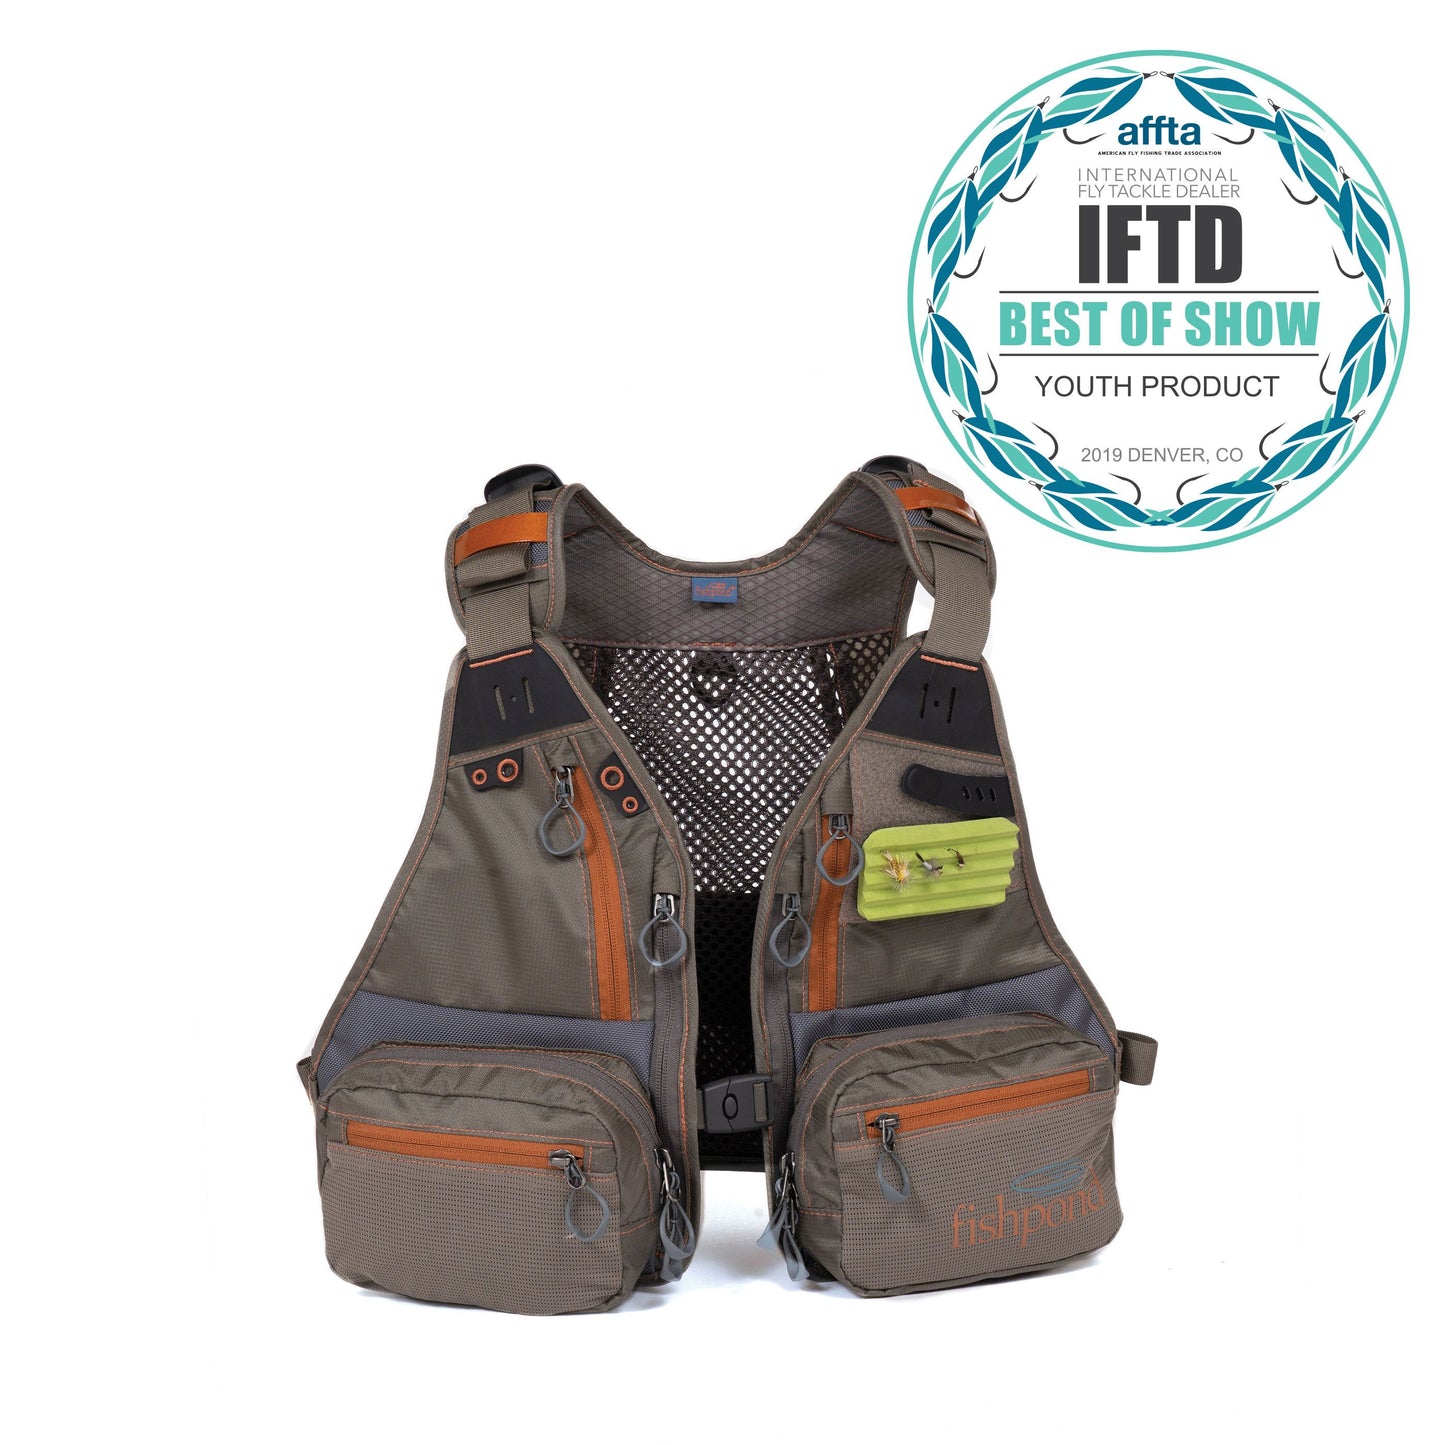 Tenderfoot Youth Vest | BEST OF SHOW